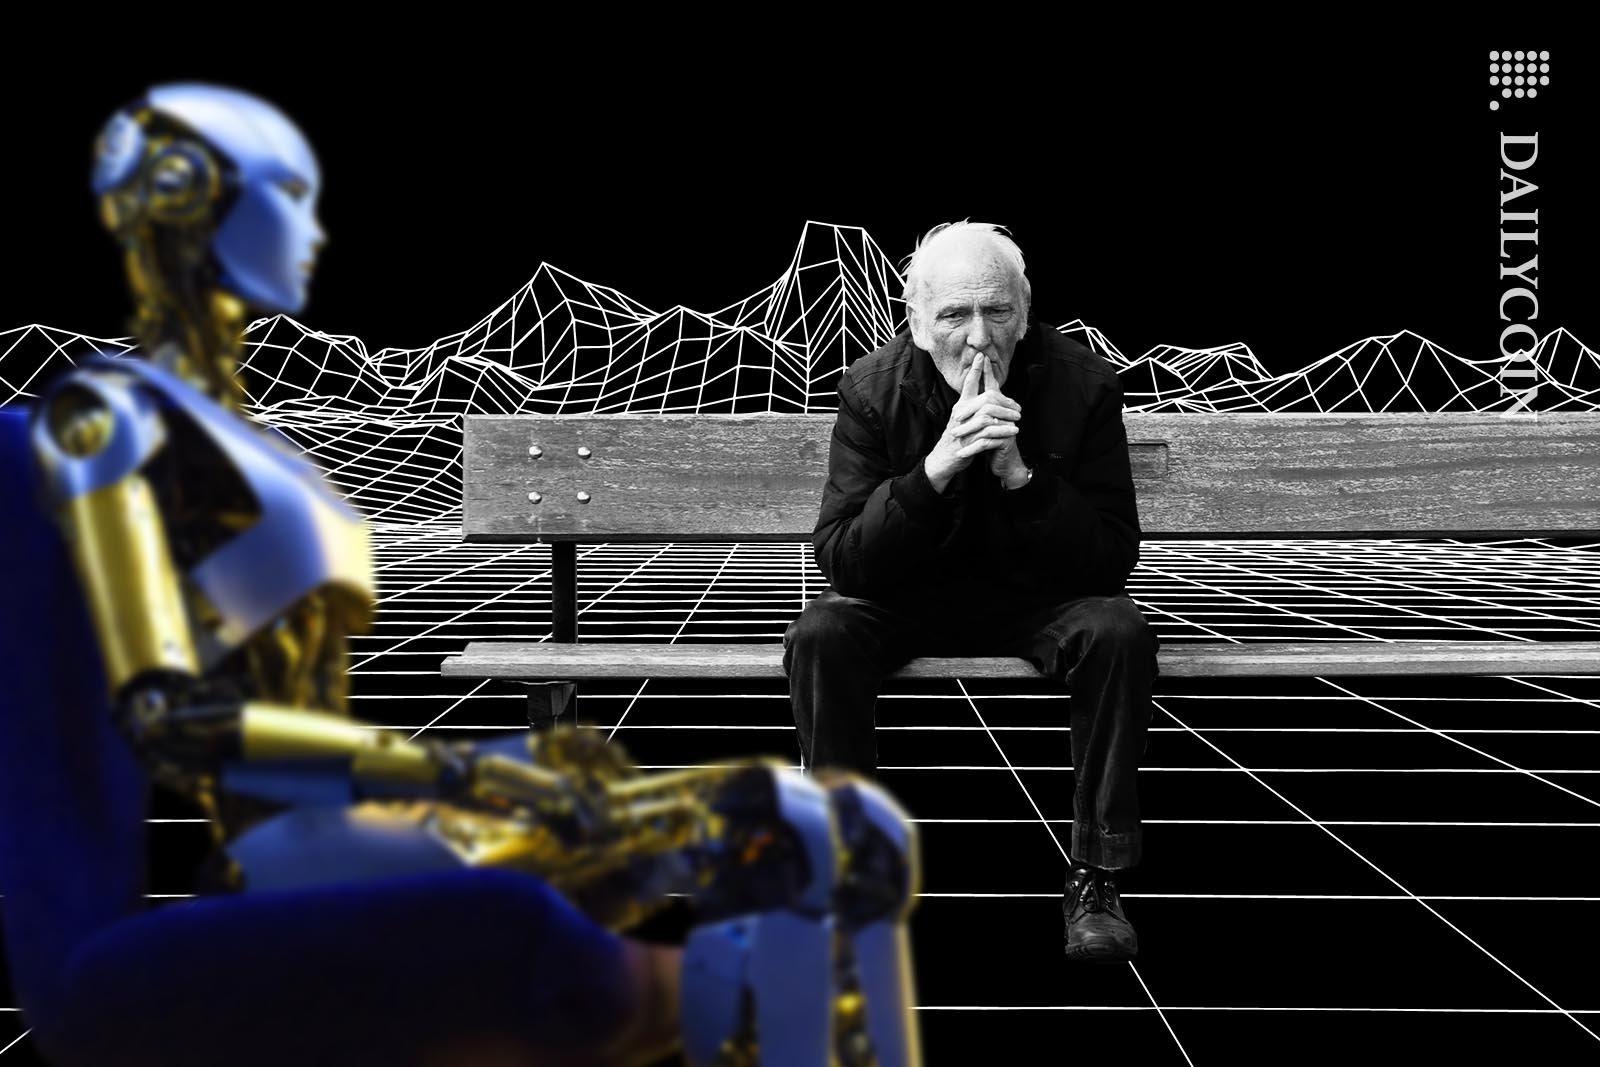 A shiny robot having a coversation wit an old man sitting on a bench.